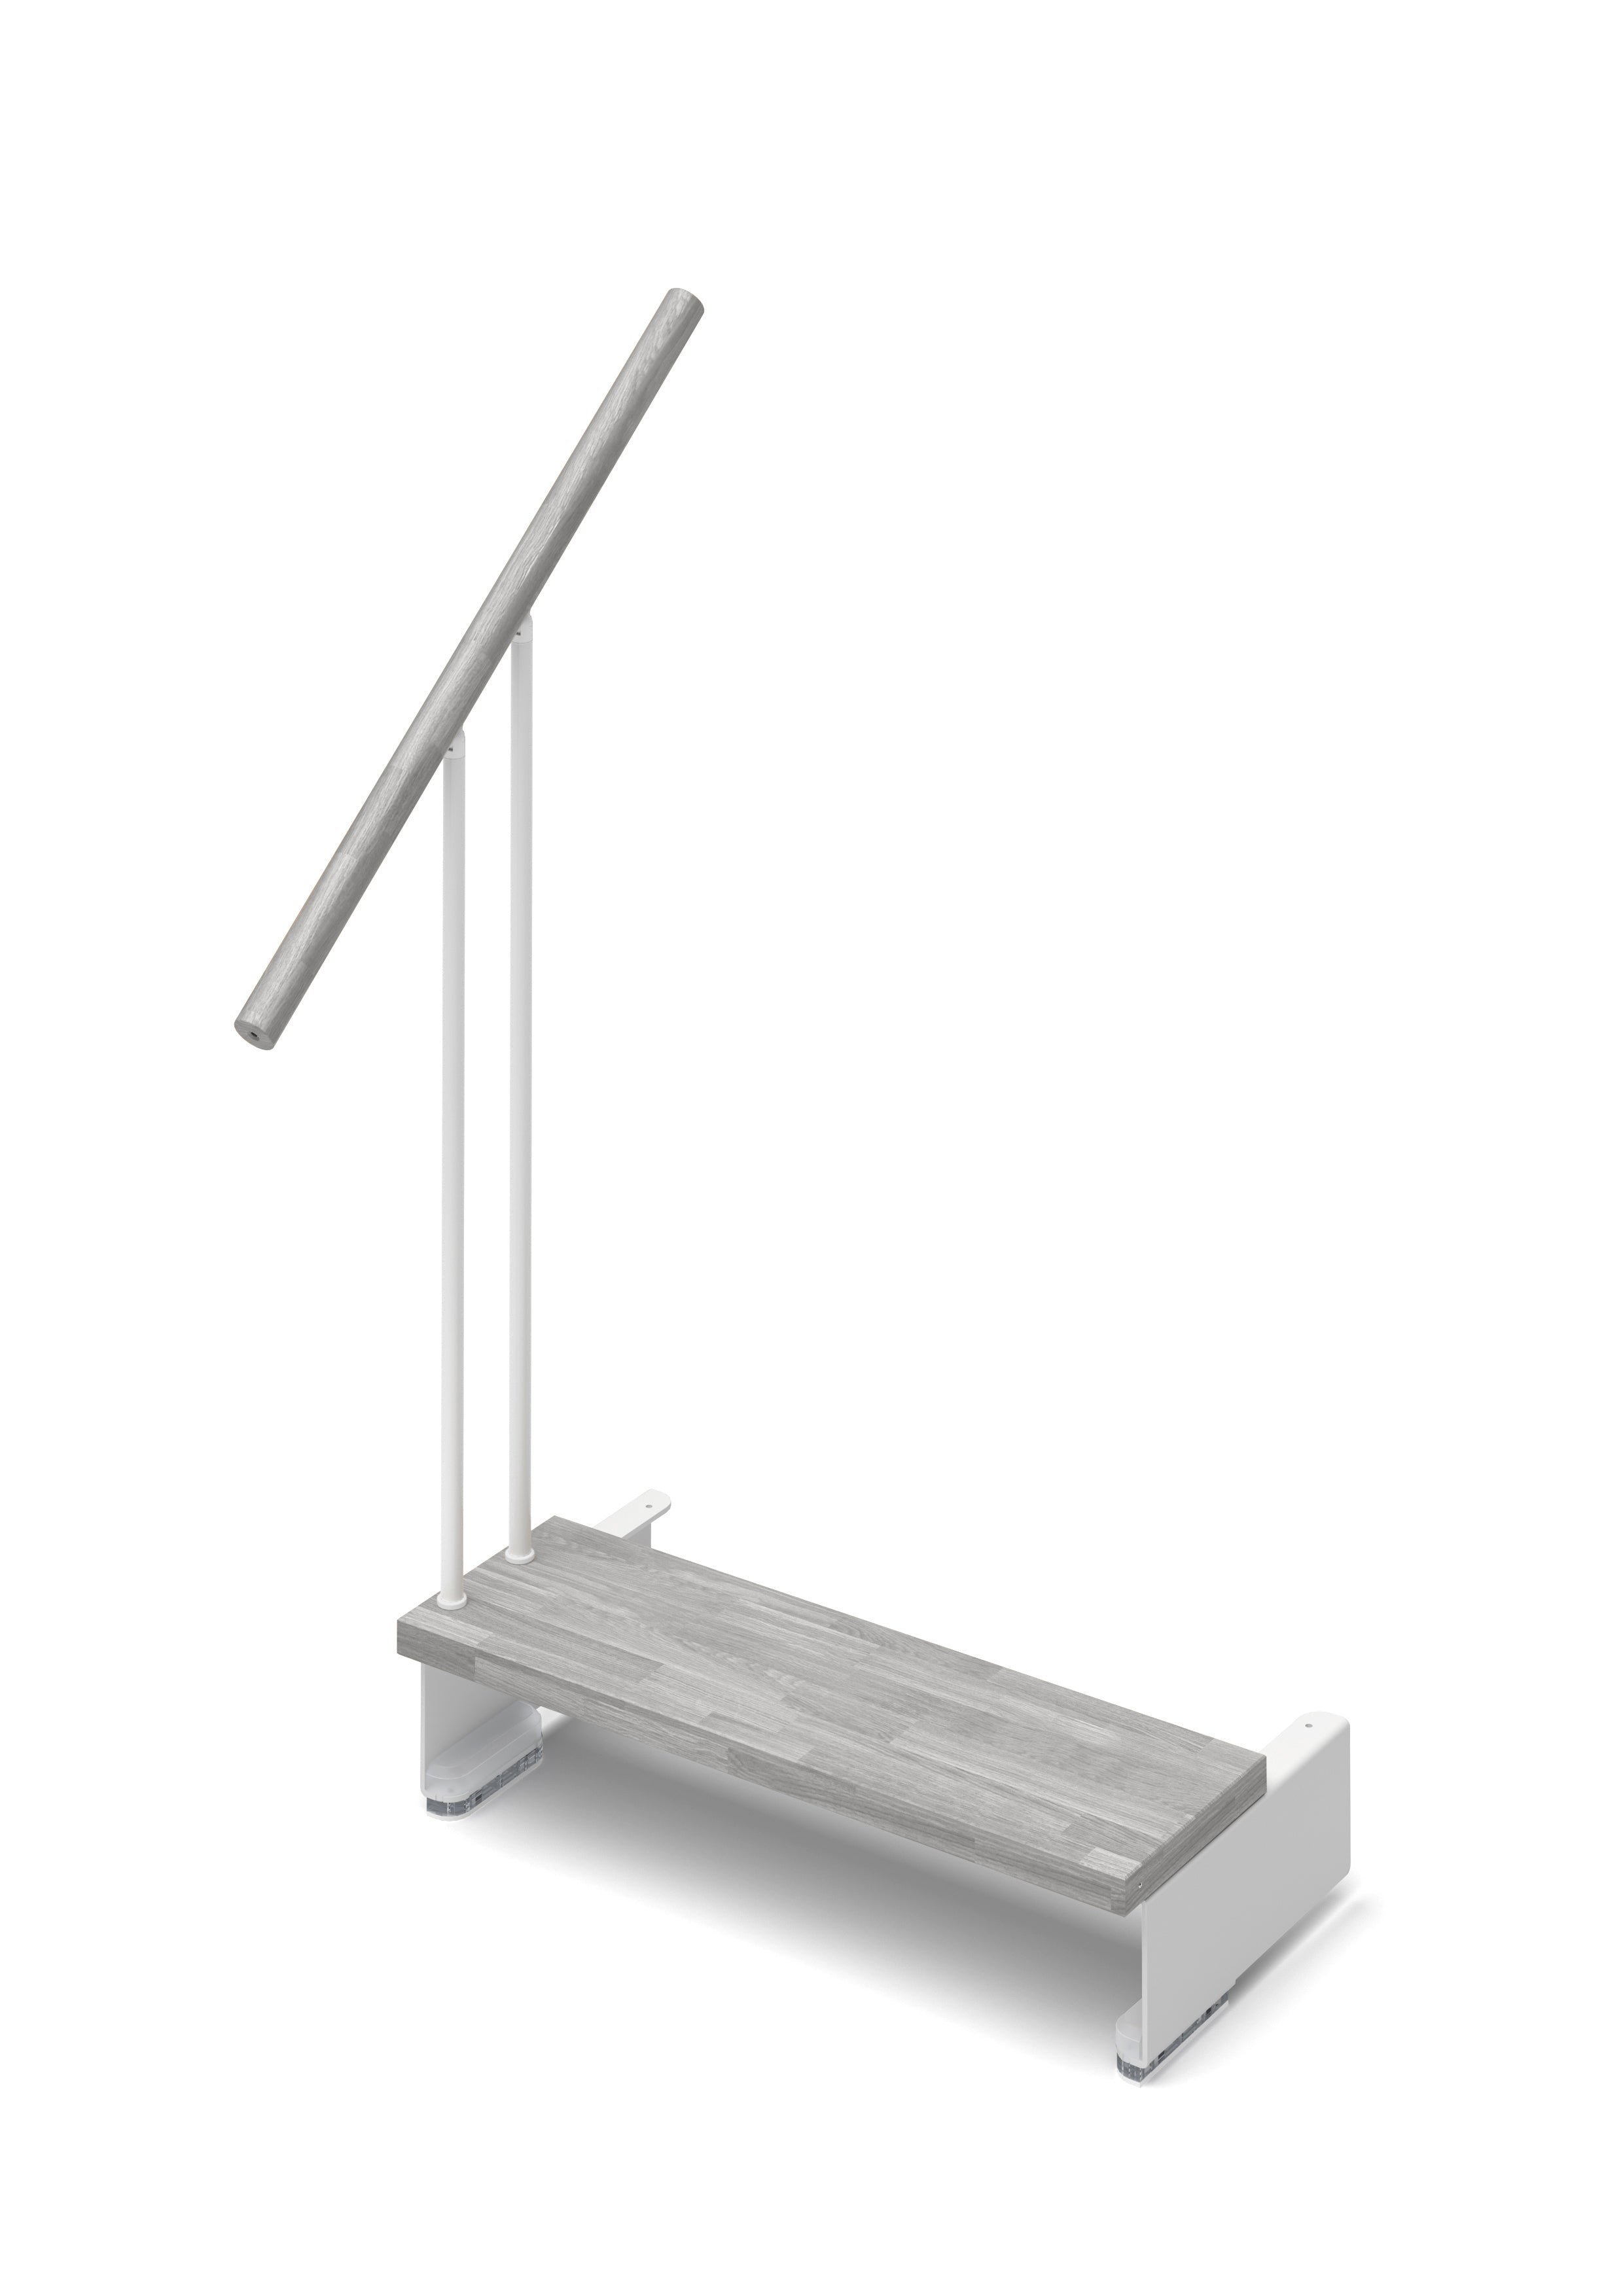 Additional step Adapta 94cm (with structure and railing) - Cement 89